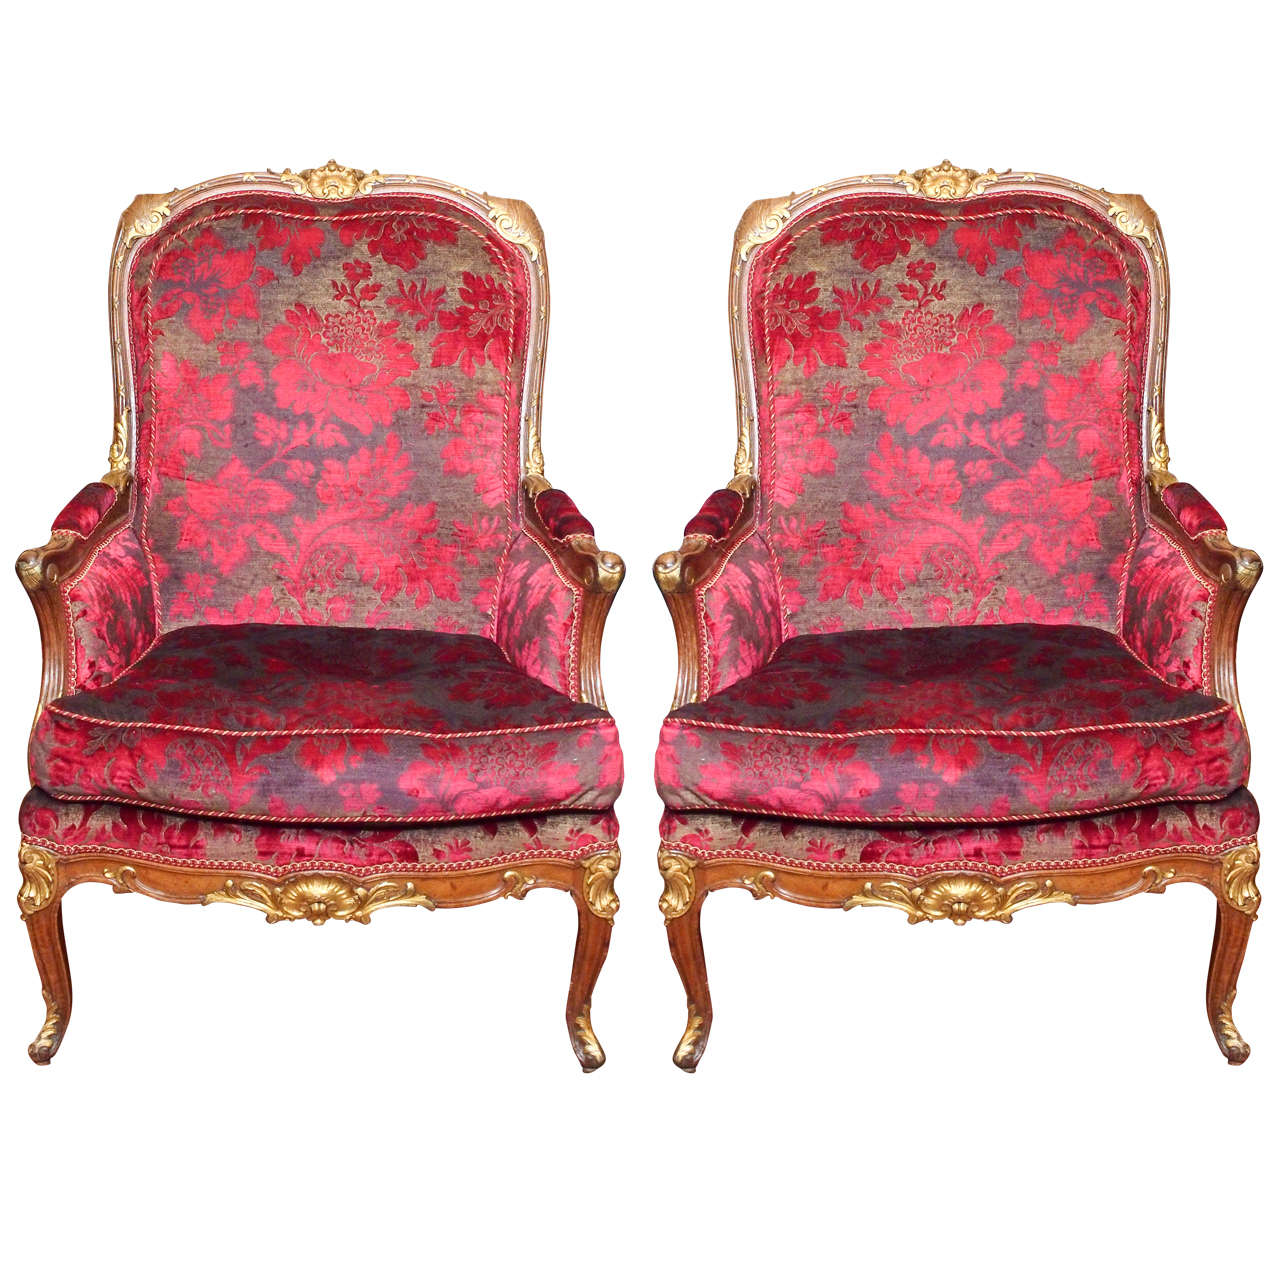 Pair of French Napoleon III Parcel Gilt Bergere